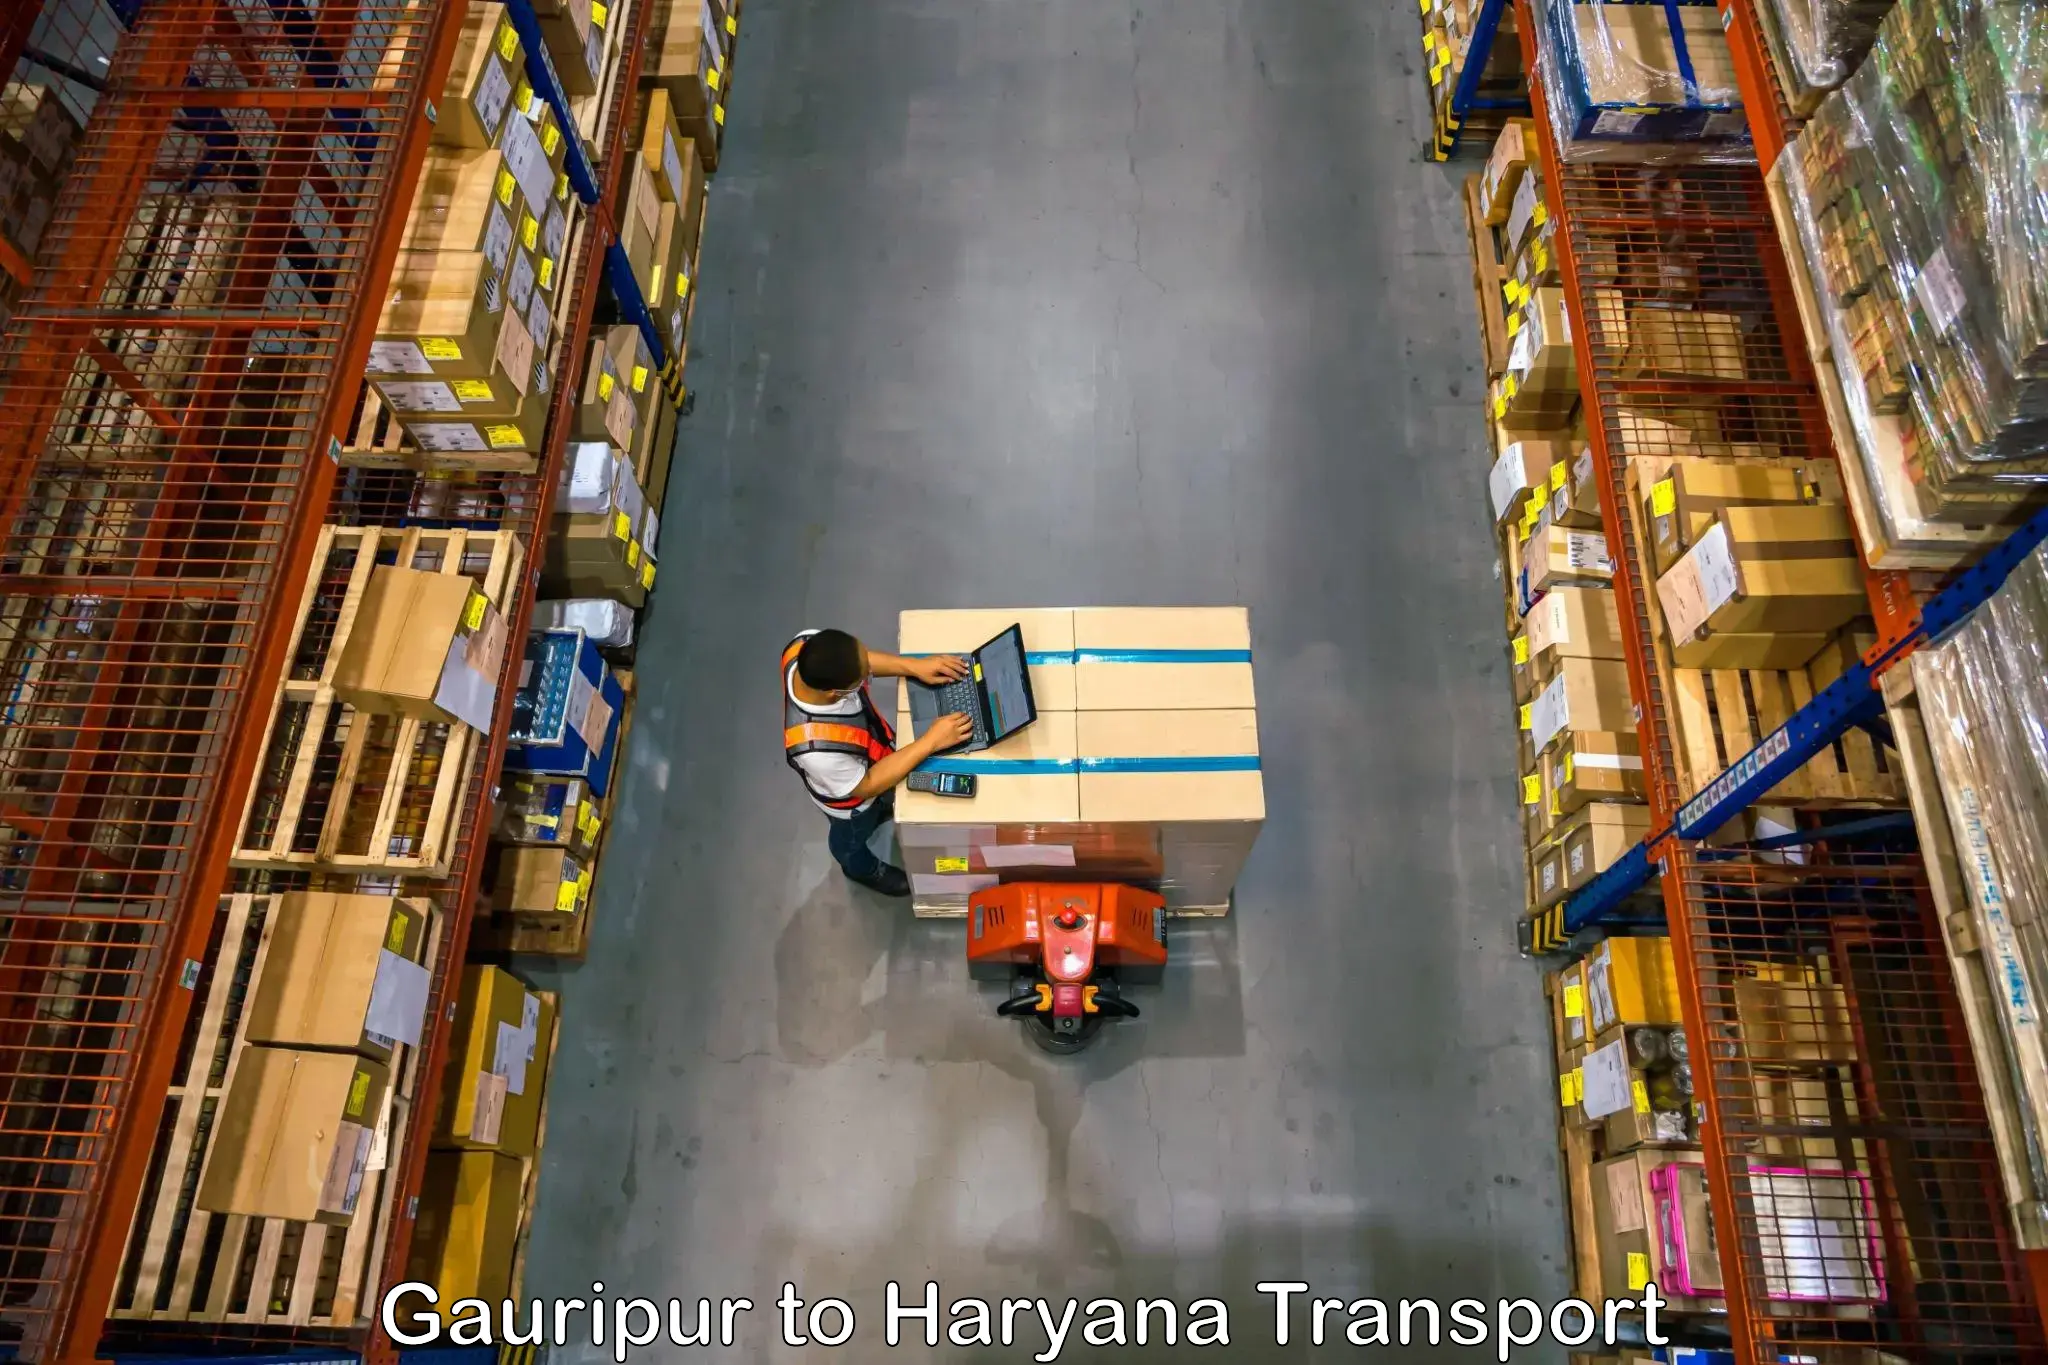 Container transport service Gauripur to Chandi Rohtak